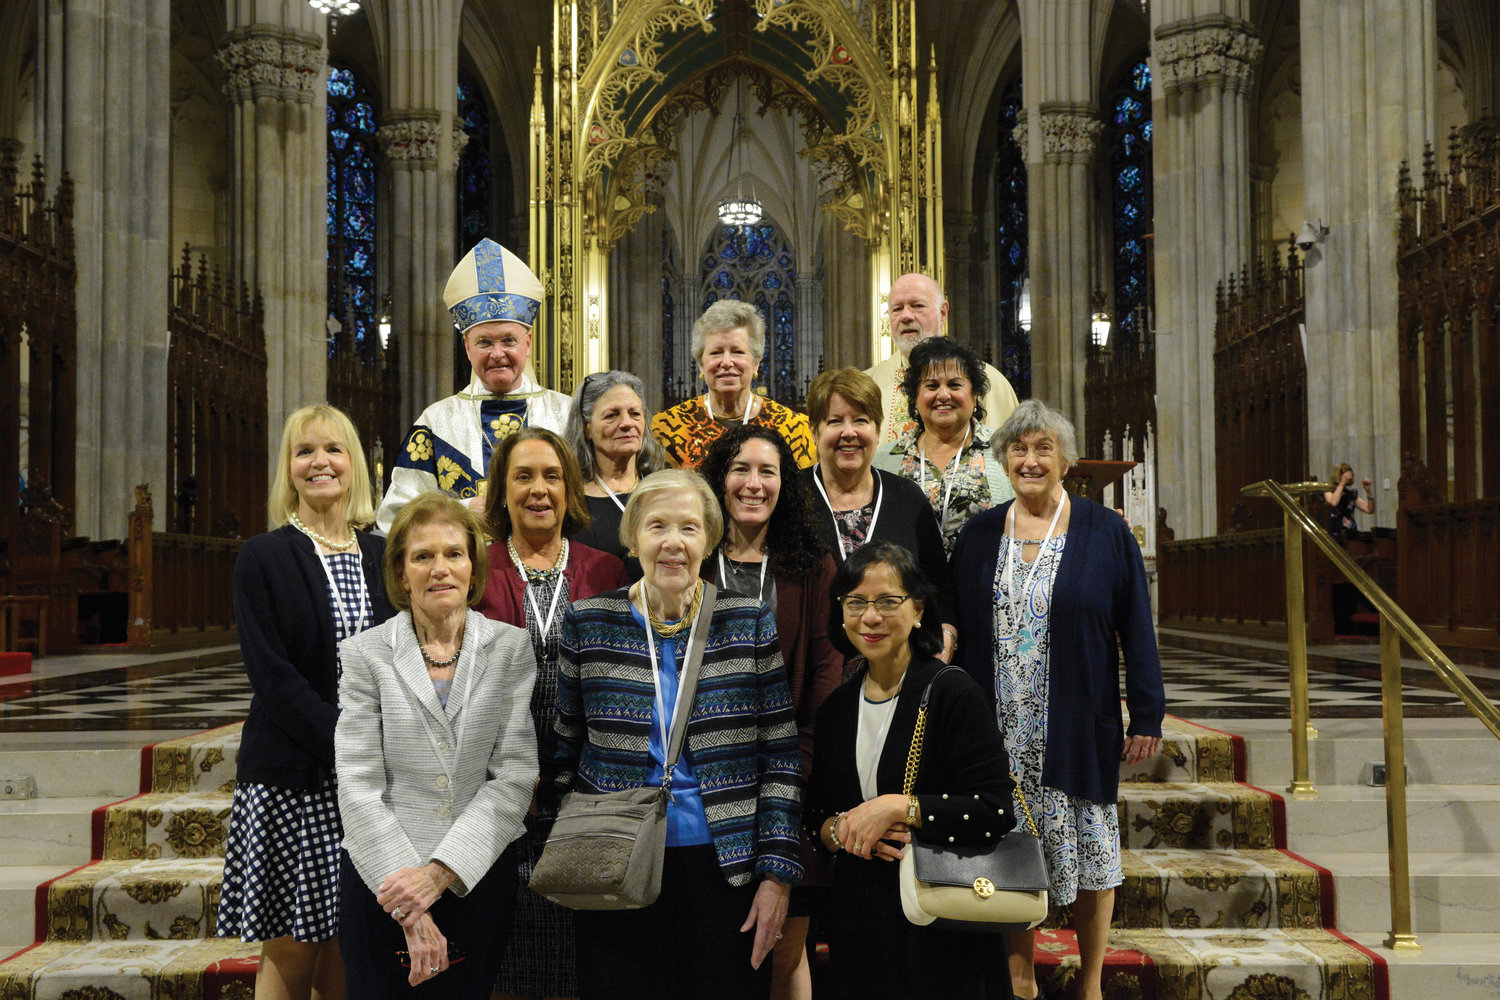 Bishop Whalen, Mrs. Buckley Teatum and Msgr. Sullivan gather with 10 of the 12 newly inducted Ladies of Charity.